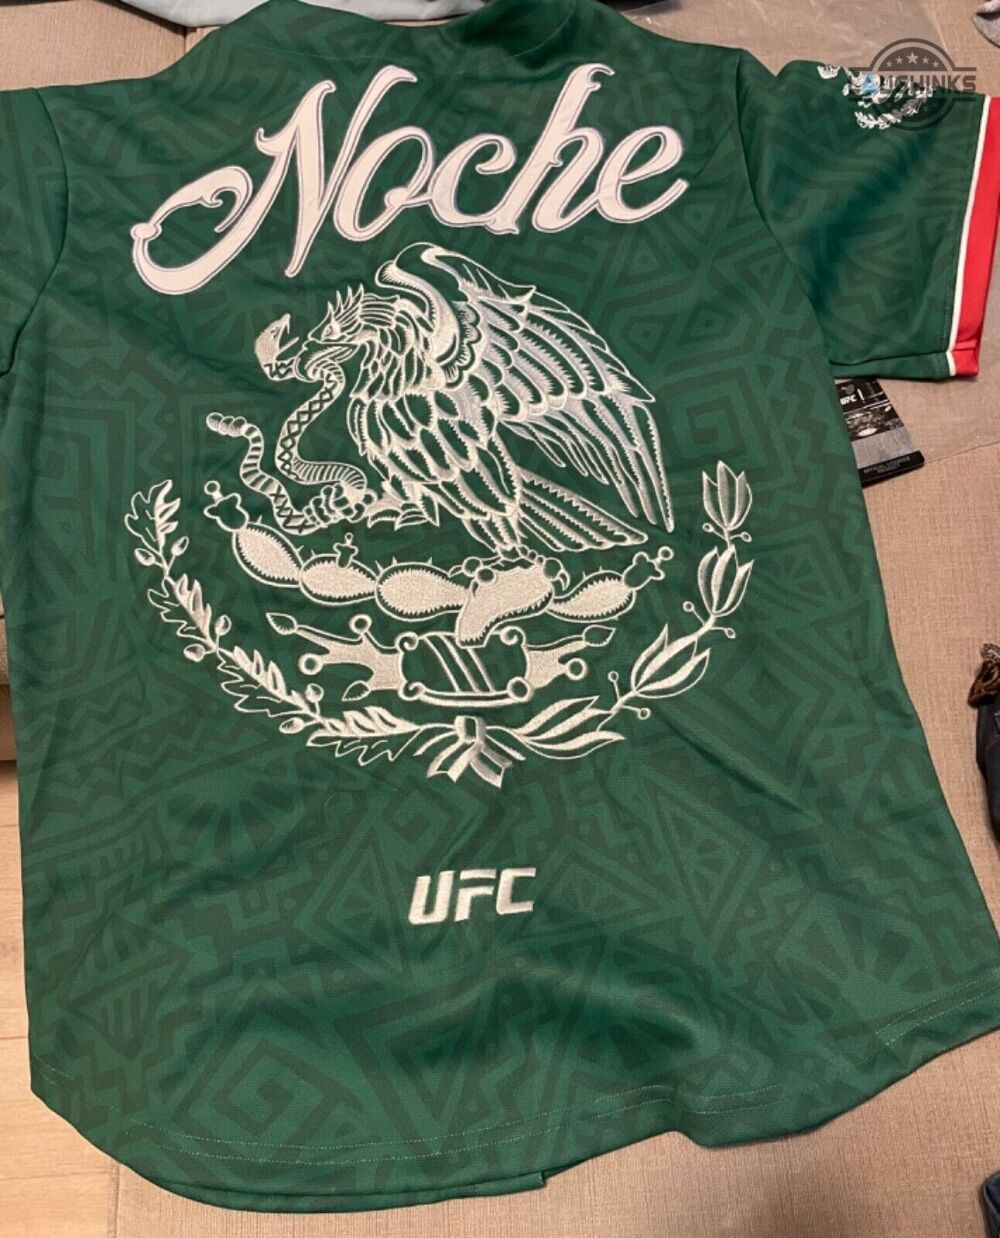 noche ufc jersey green replica all over printed noche ufc shirt ufc mexico baseball jersey shirts 2023 new ufc noche jersey for sale mexican football soccer shirt laughinks 1